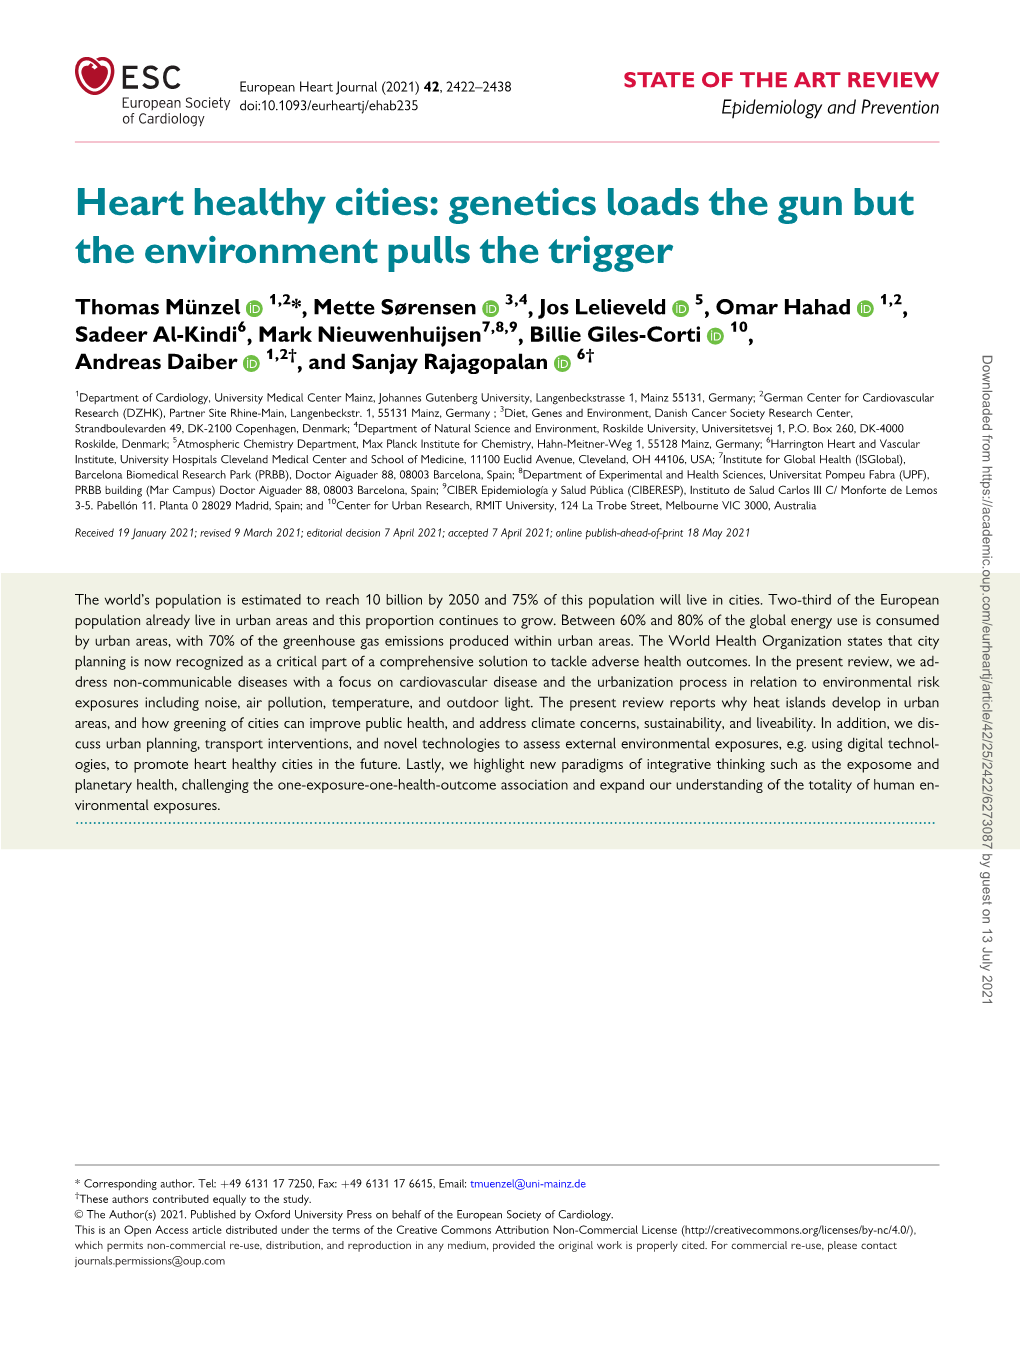 Heart Healthy Cities: Genetics Loads the Gun but the Environment Pulls the Trigger